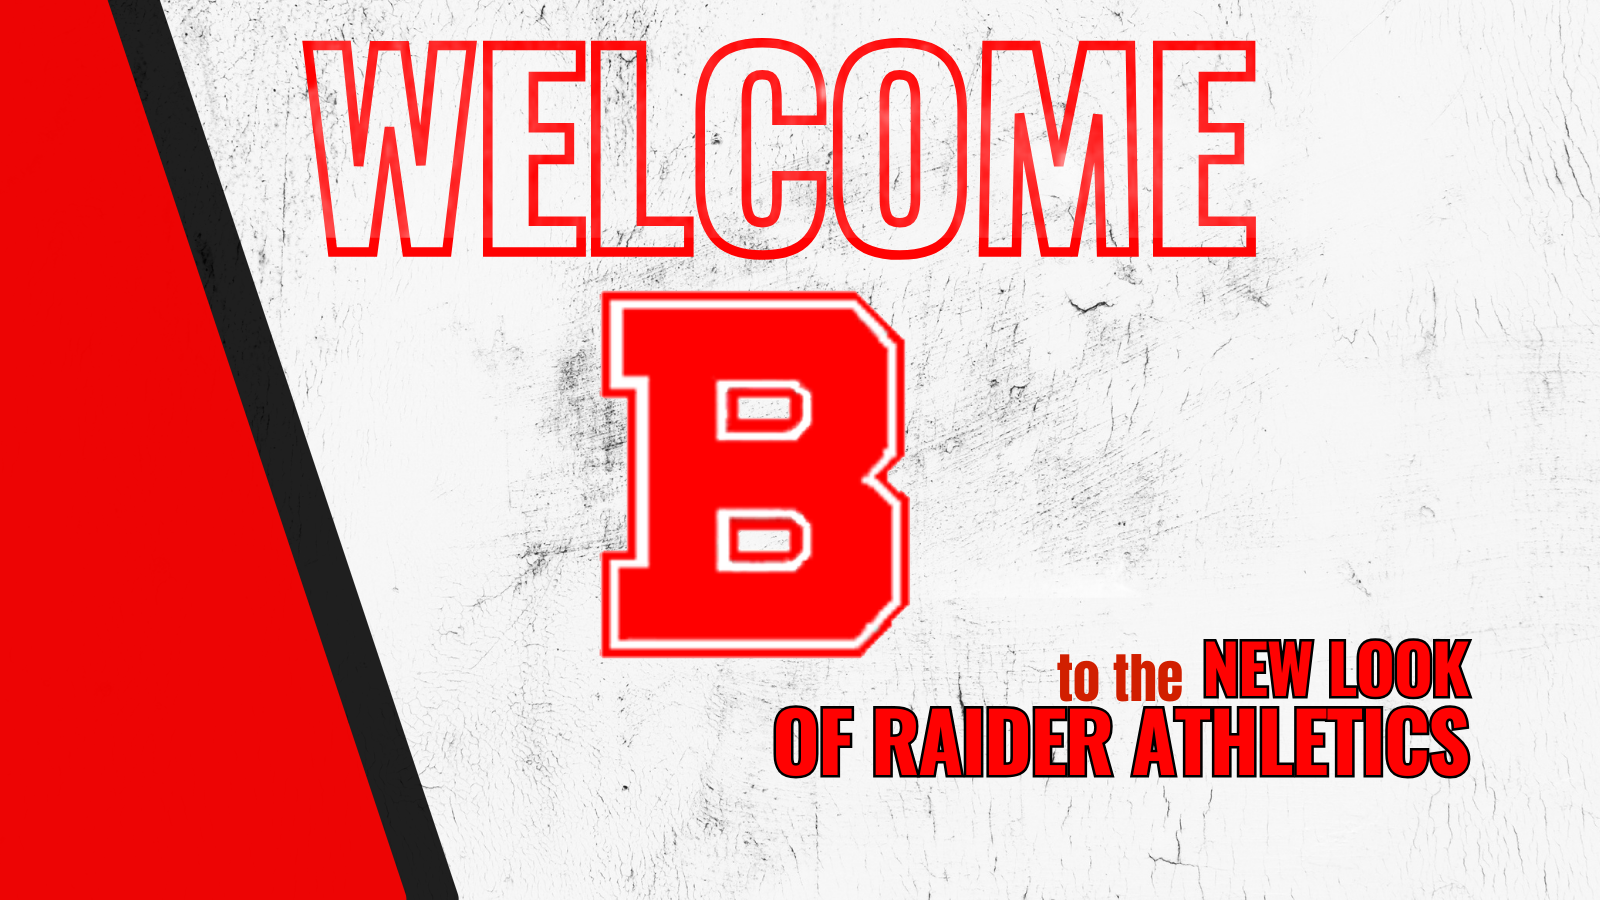 1709844311_CopyofOleyValleyWelcometo1280x320pxTwitterPost1.png - Image for 🎉 Exciting News for Raider Athletics Fans! 🎉